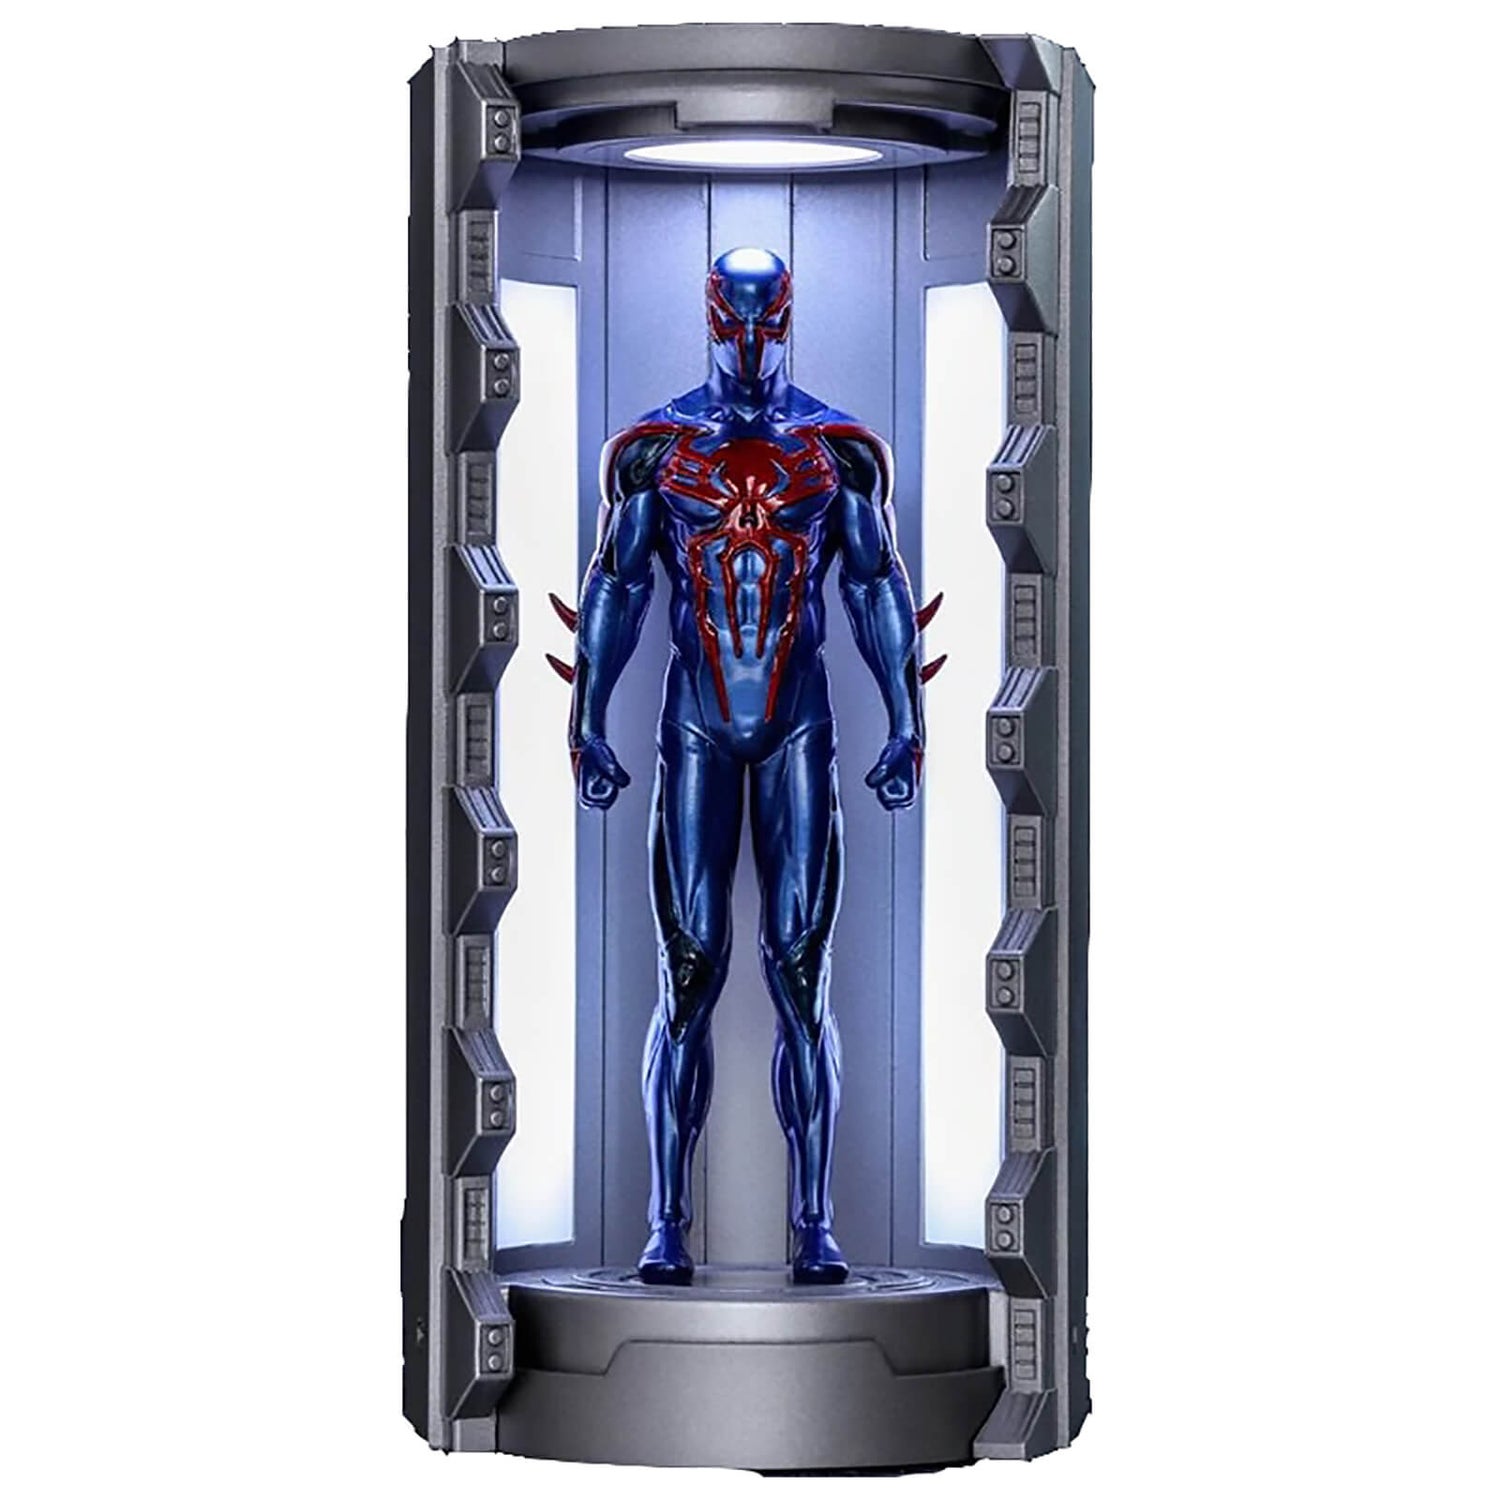 Hot Toys Marvel's Spider-Man 2099 Black Suit with Spider-Man Armory Video Game Masterpiece Compact Miniature Figure